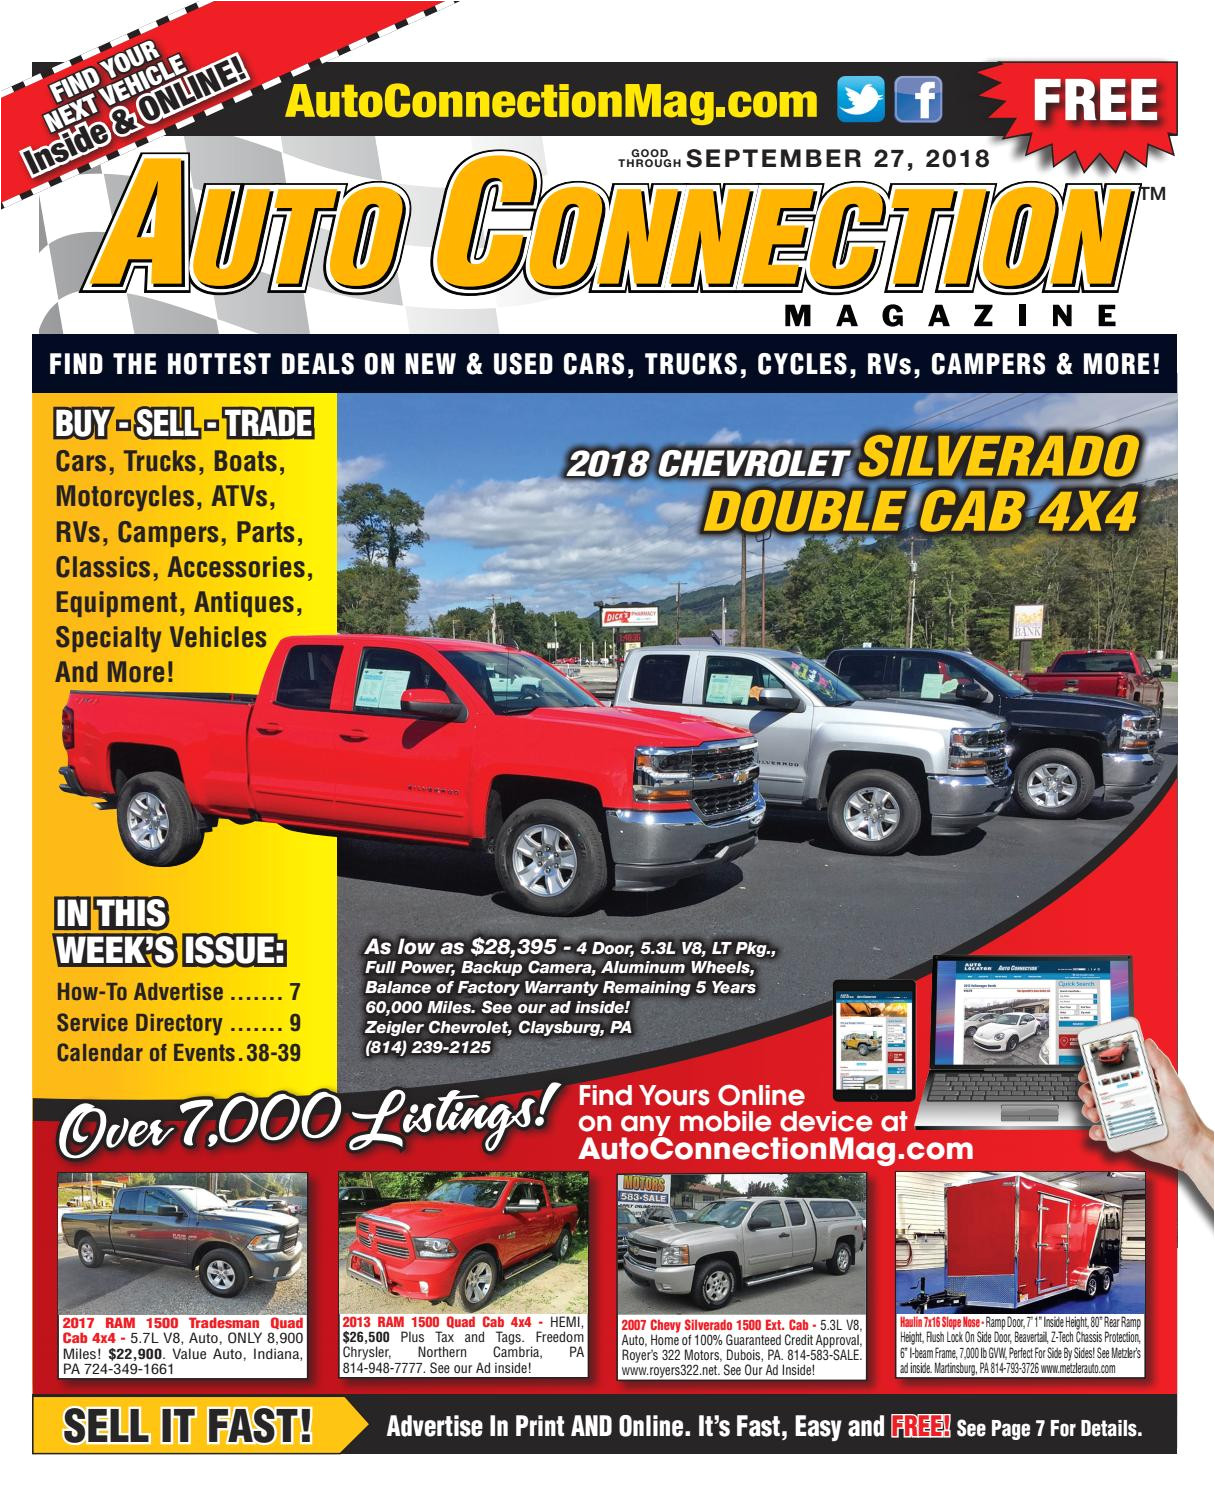 09 27 18 auto connection magazine by auto locator and auto connection issuu